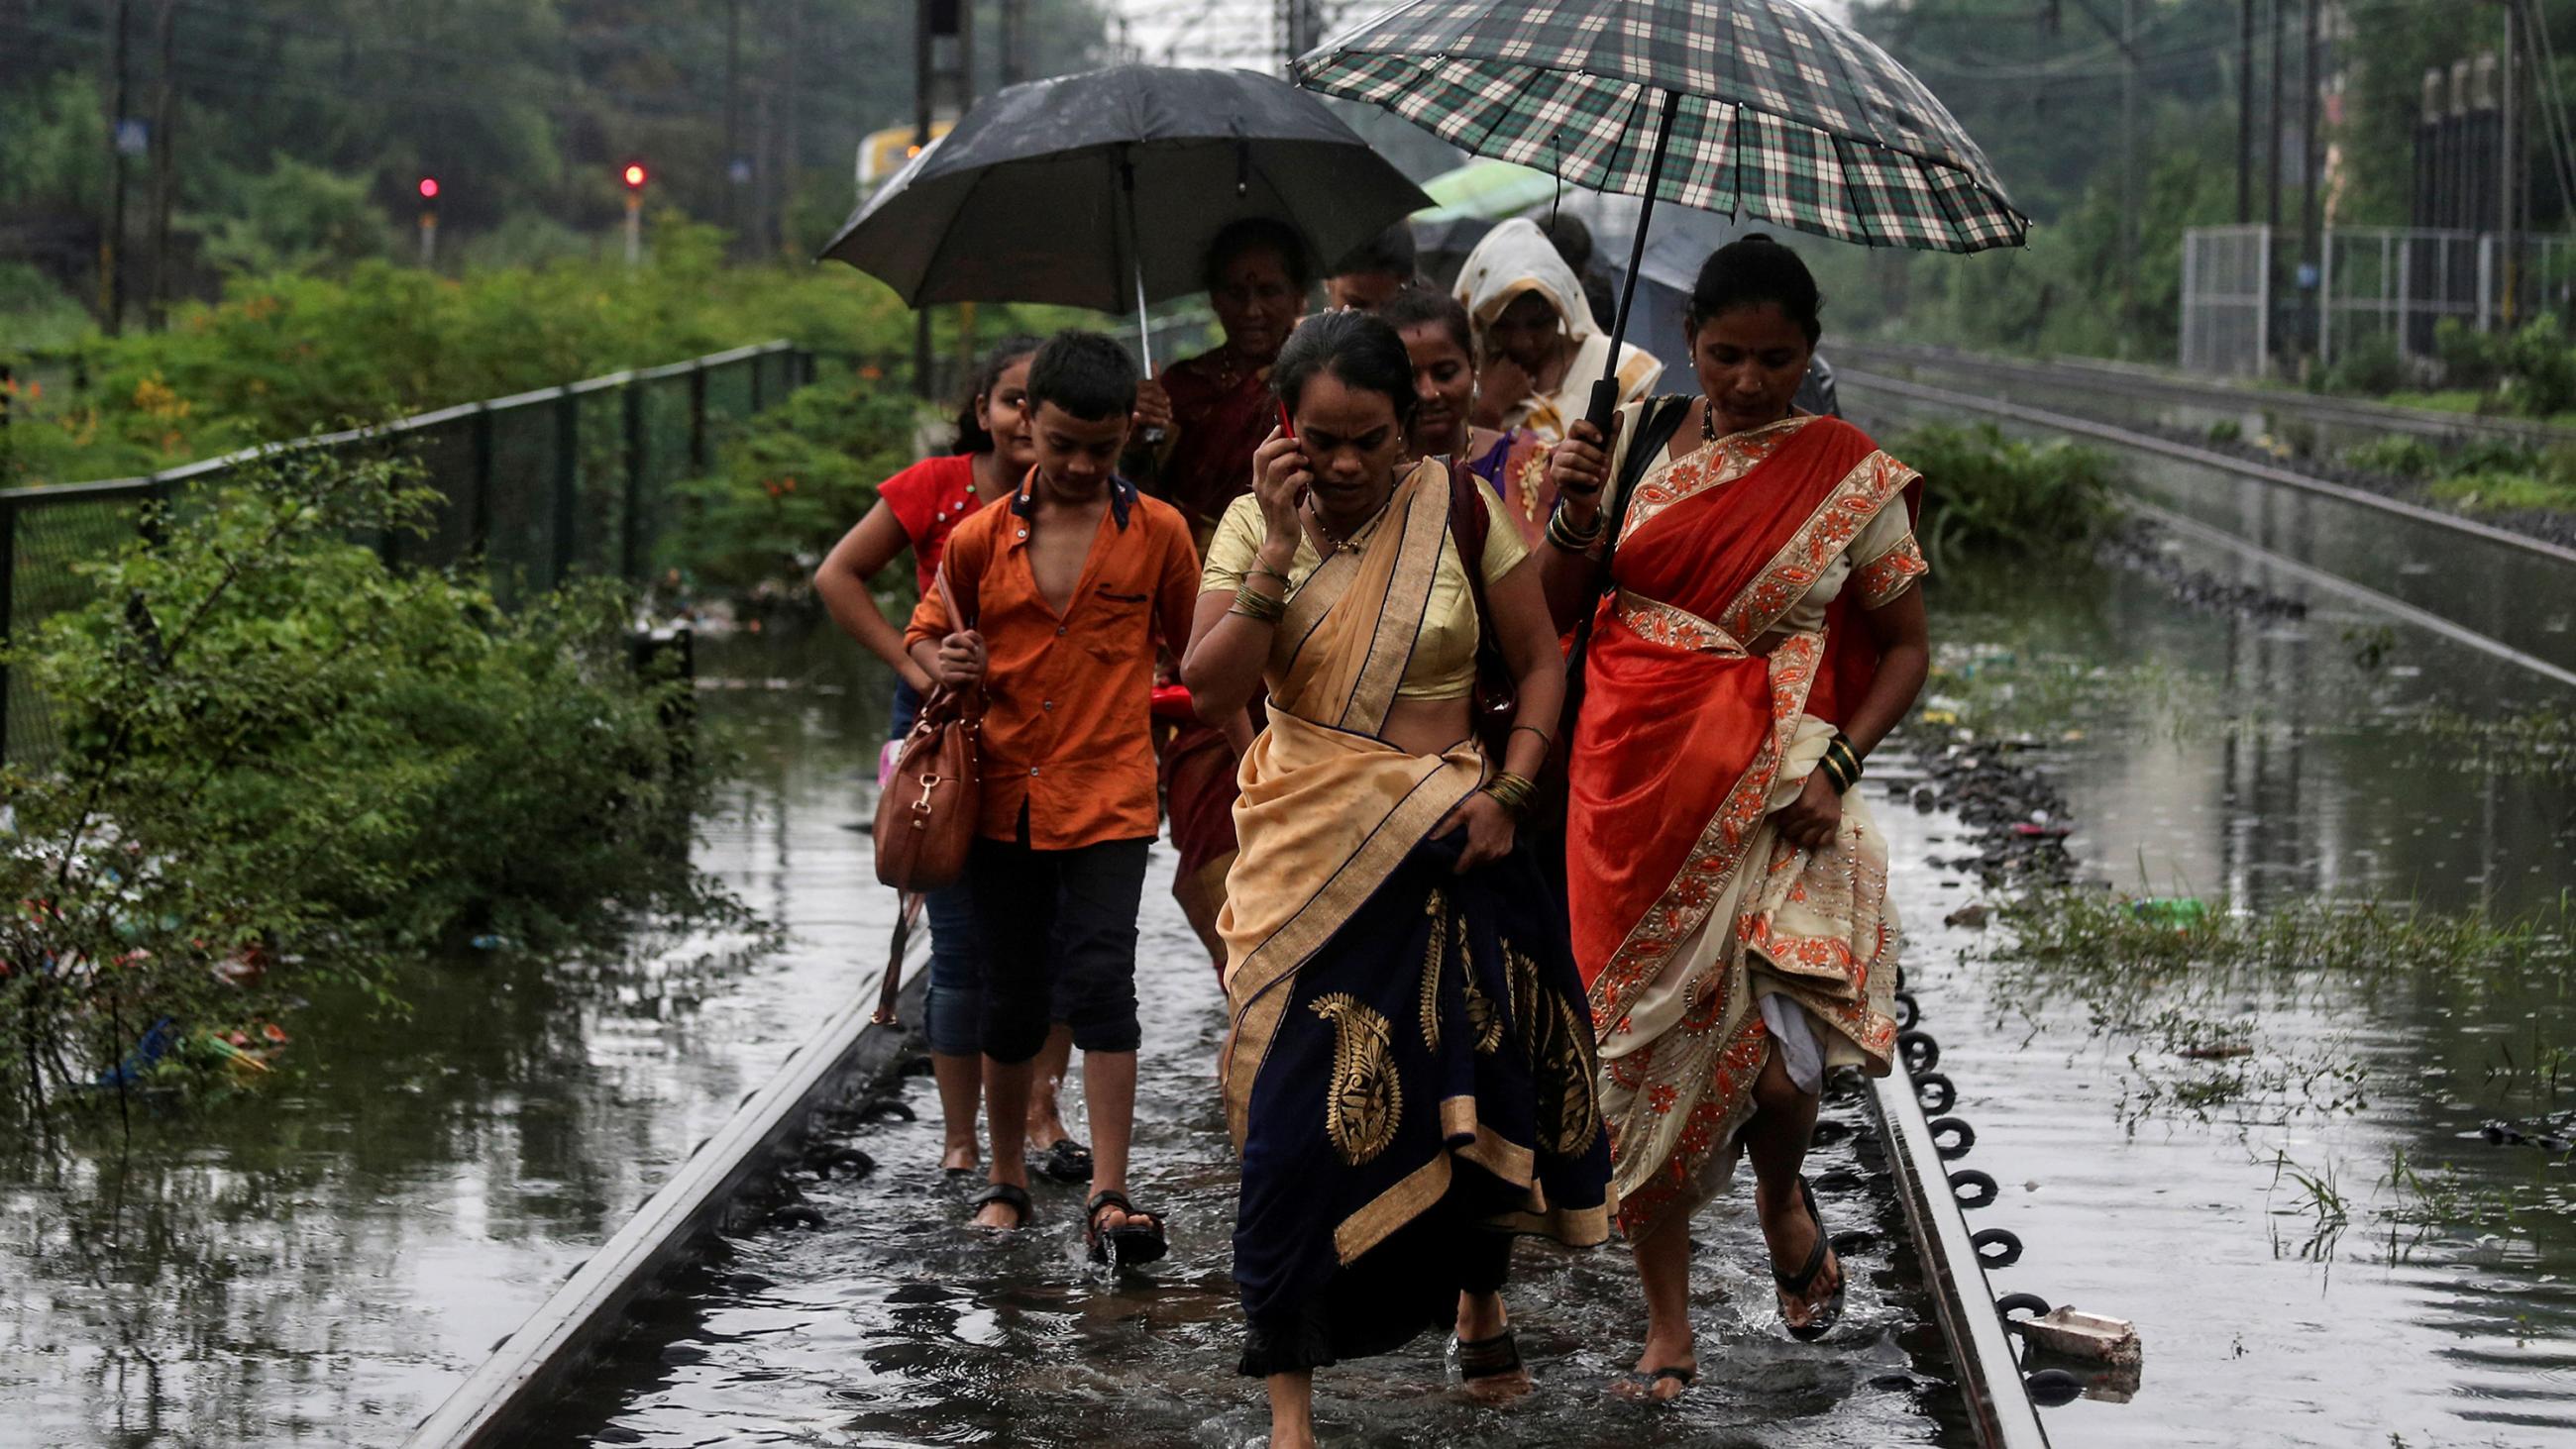 The image shows several people walking ankle-deep in water along railroad tracks as they hold several umbrellas over their heads in the rain. 